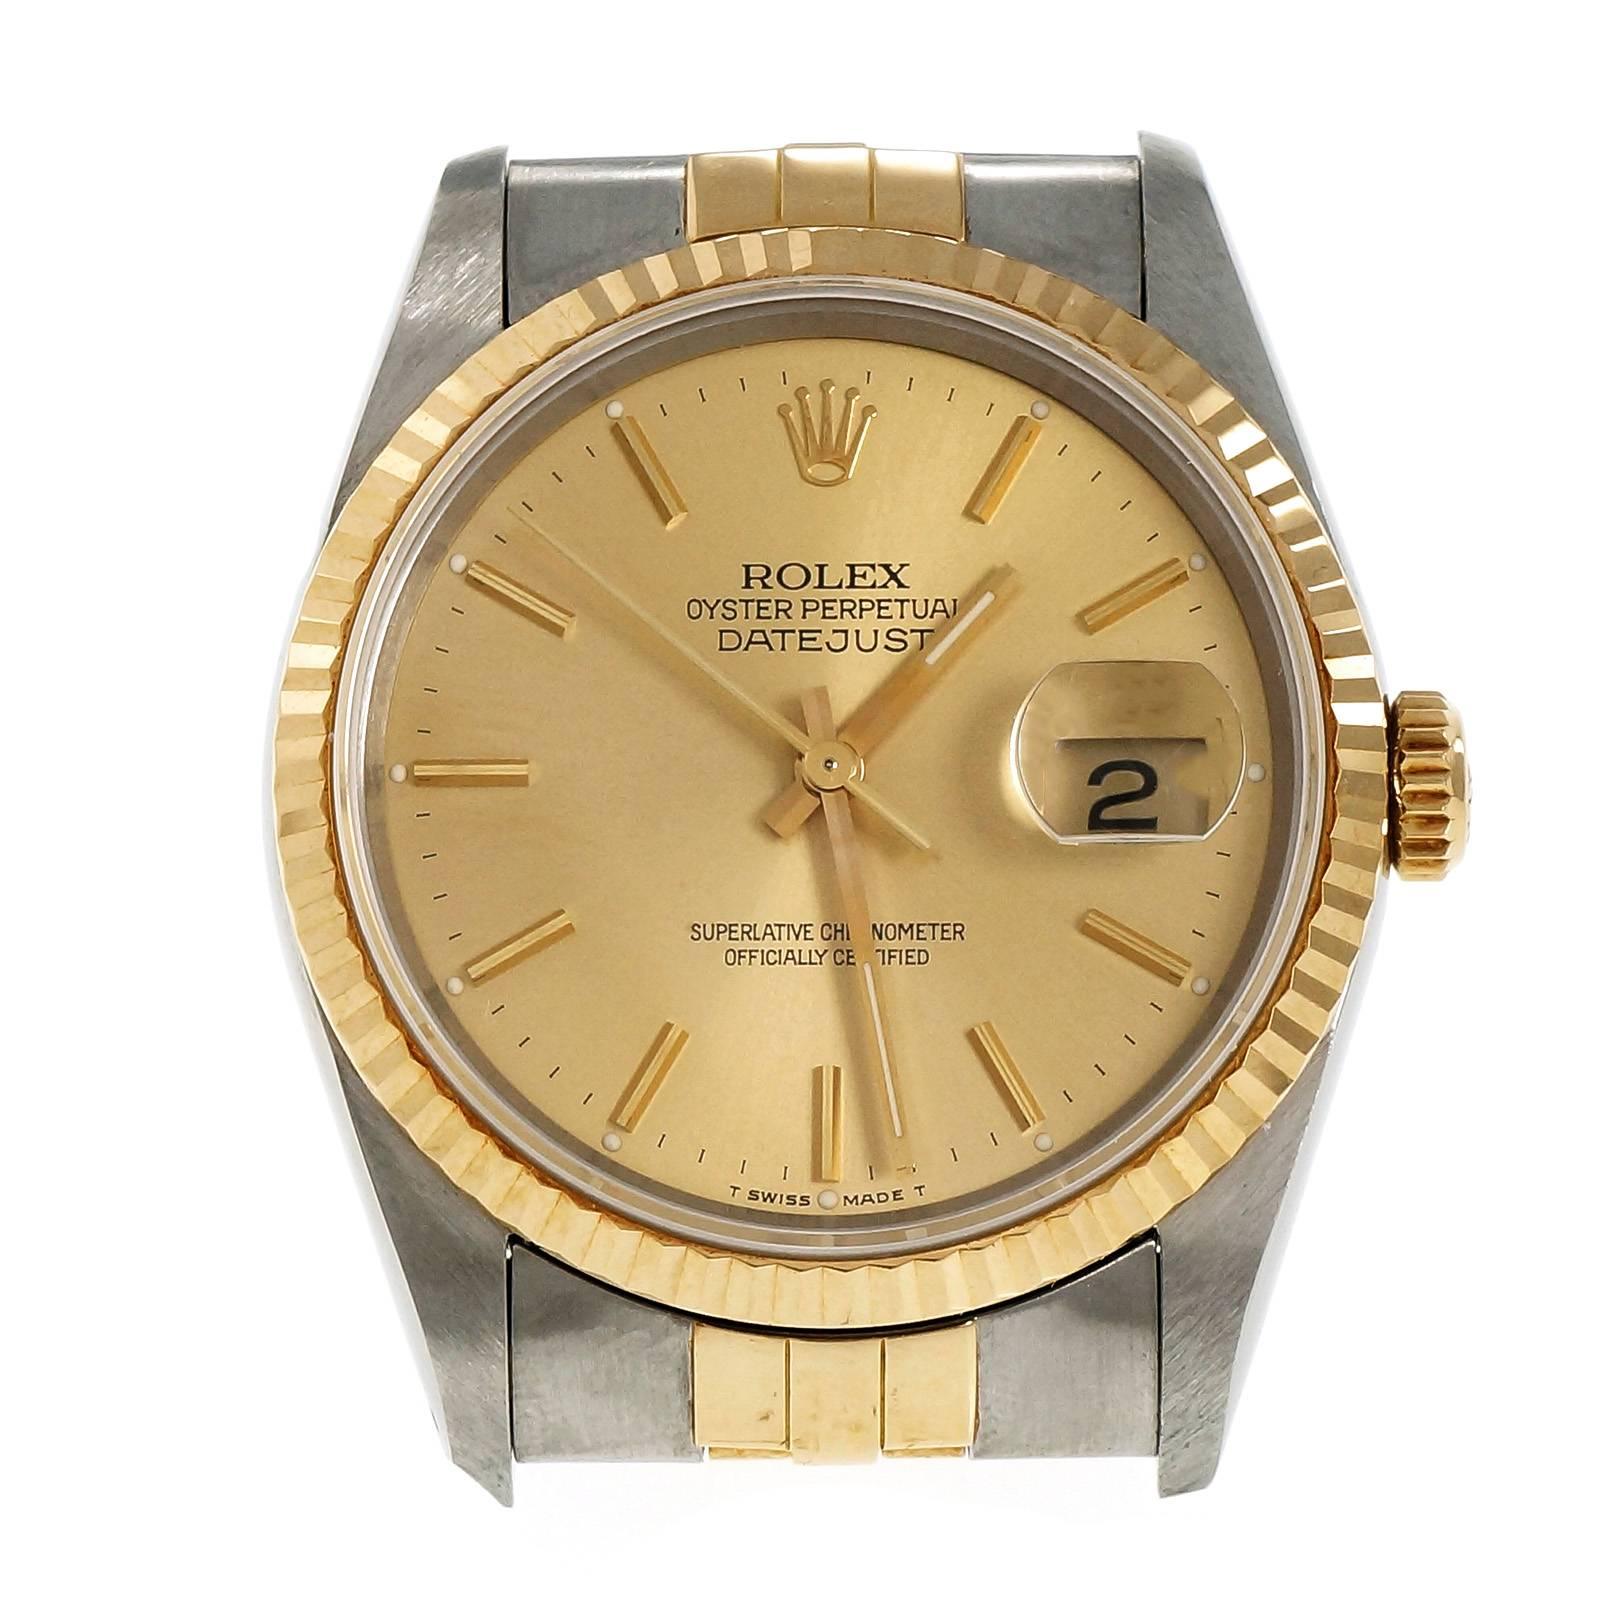 1991 Rolex Datejust 18k gold and steel wristwatch. Tight band and buckle. Original case back sticker.  Original papers. Circa 1991.

Band length: 7.75 inches – can be shortened – links available to lengthen
104.7 grams
Length: 43.6mm
Width: